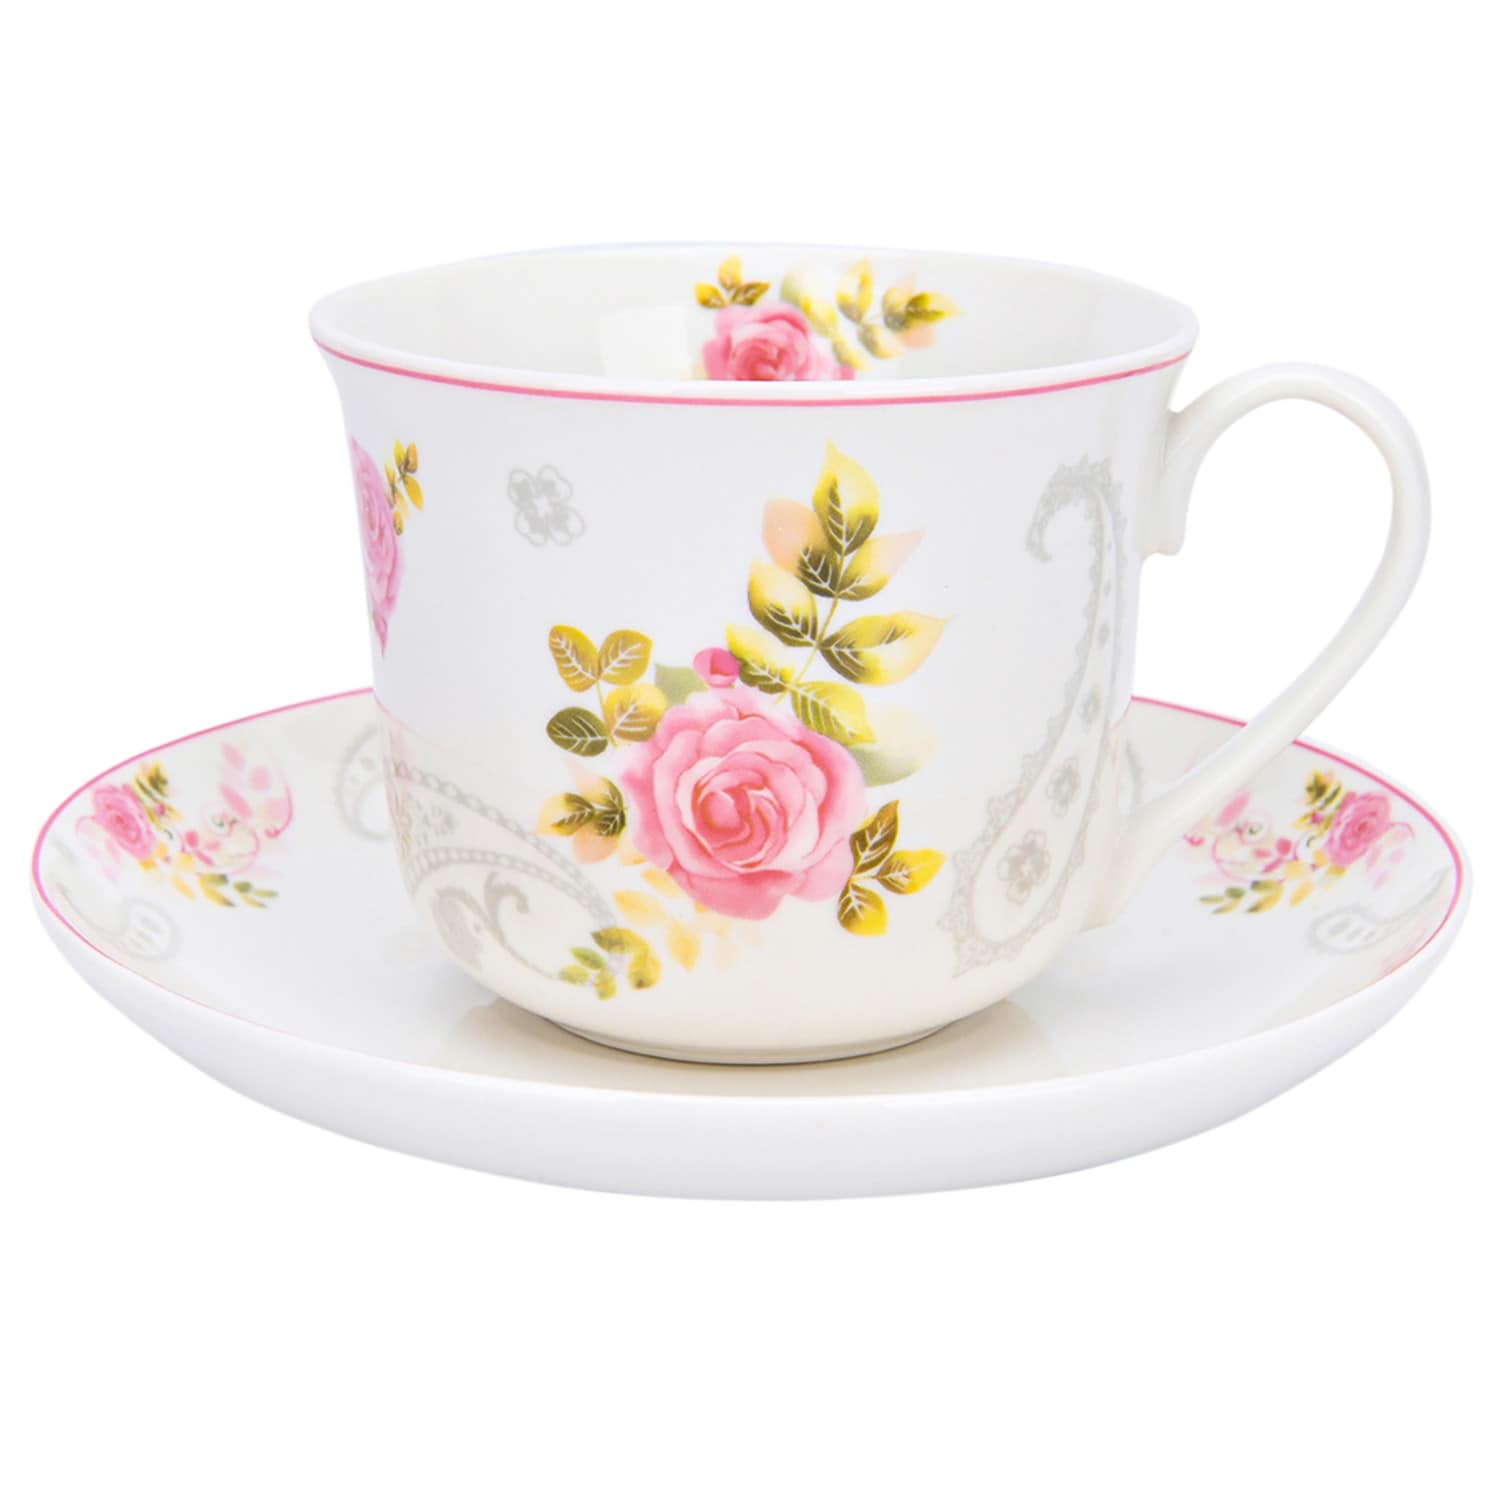 https://ak1.ostkcdn.com/images/products/is/images/direct/0ce46046a703616bc77d24eea94bee1687410756/STP-Goods-13.5-fl-oz-Rose-Garden-Tea-Coffee-Cup-%26-Saucer.jpg